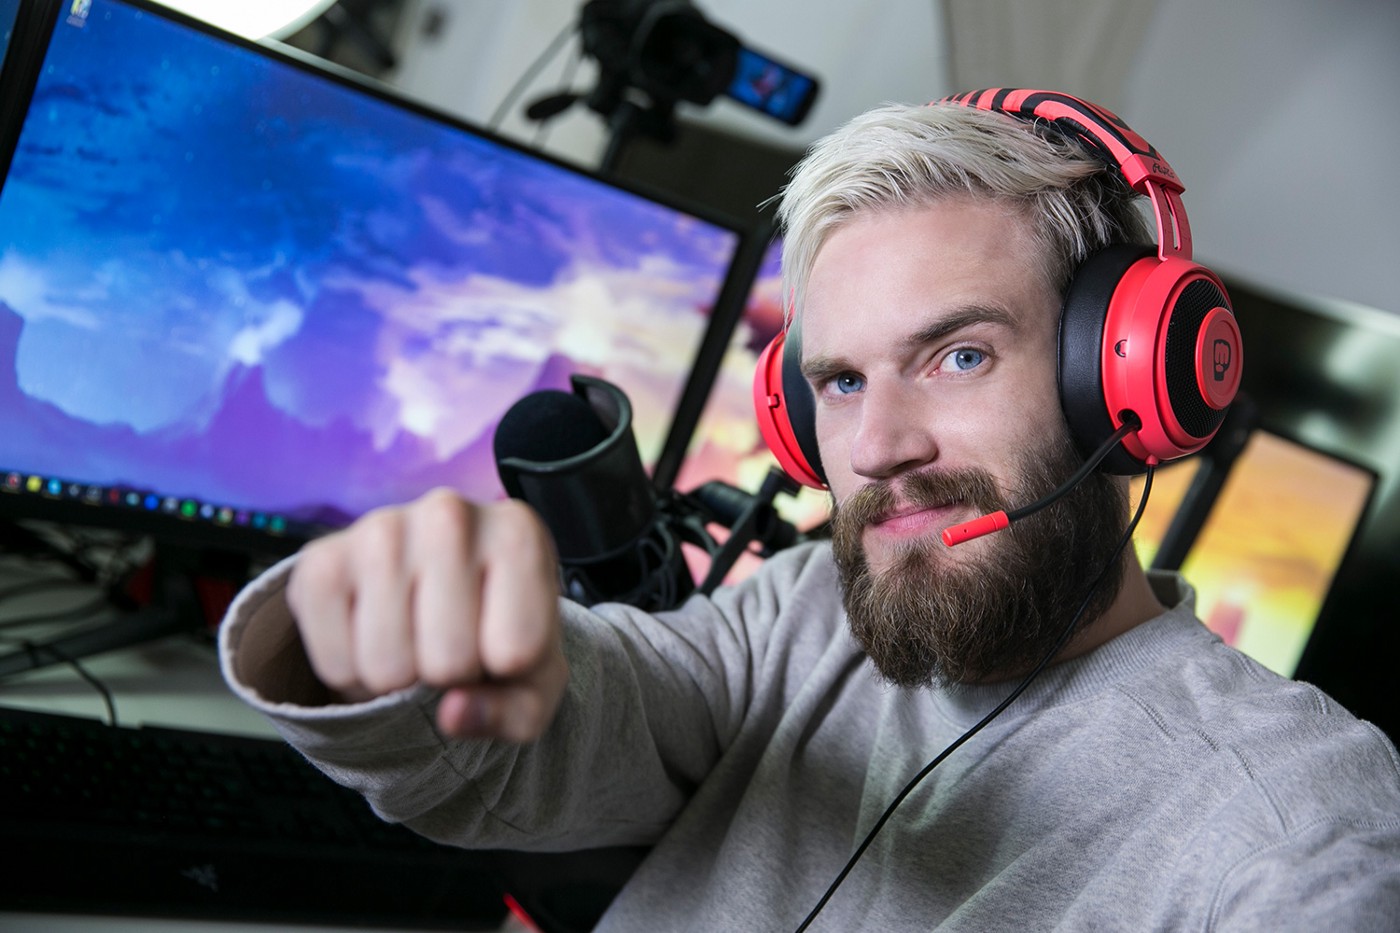 What Microphone Does PewDiePie Use?